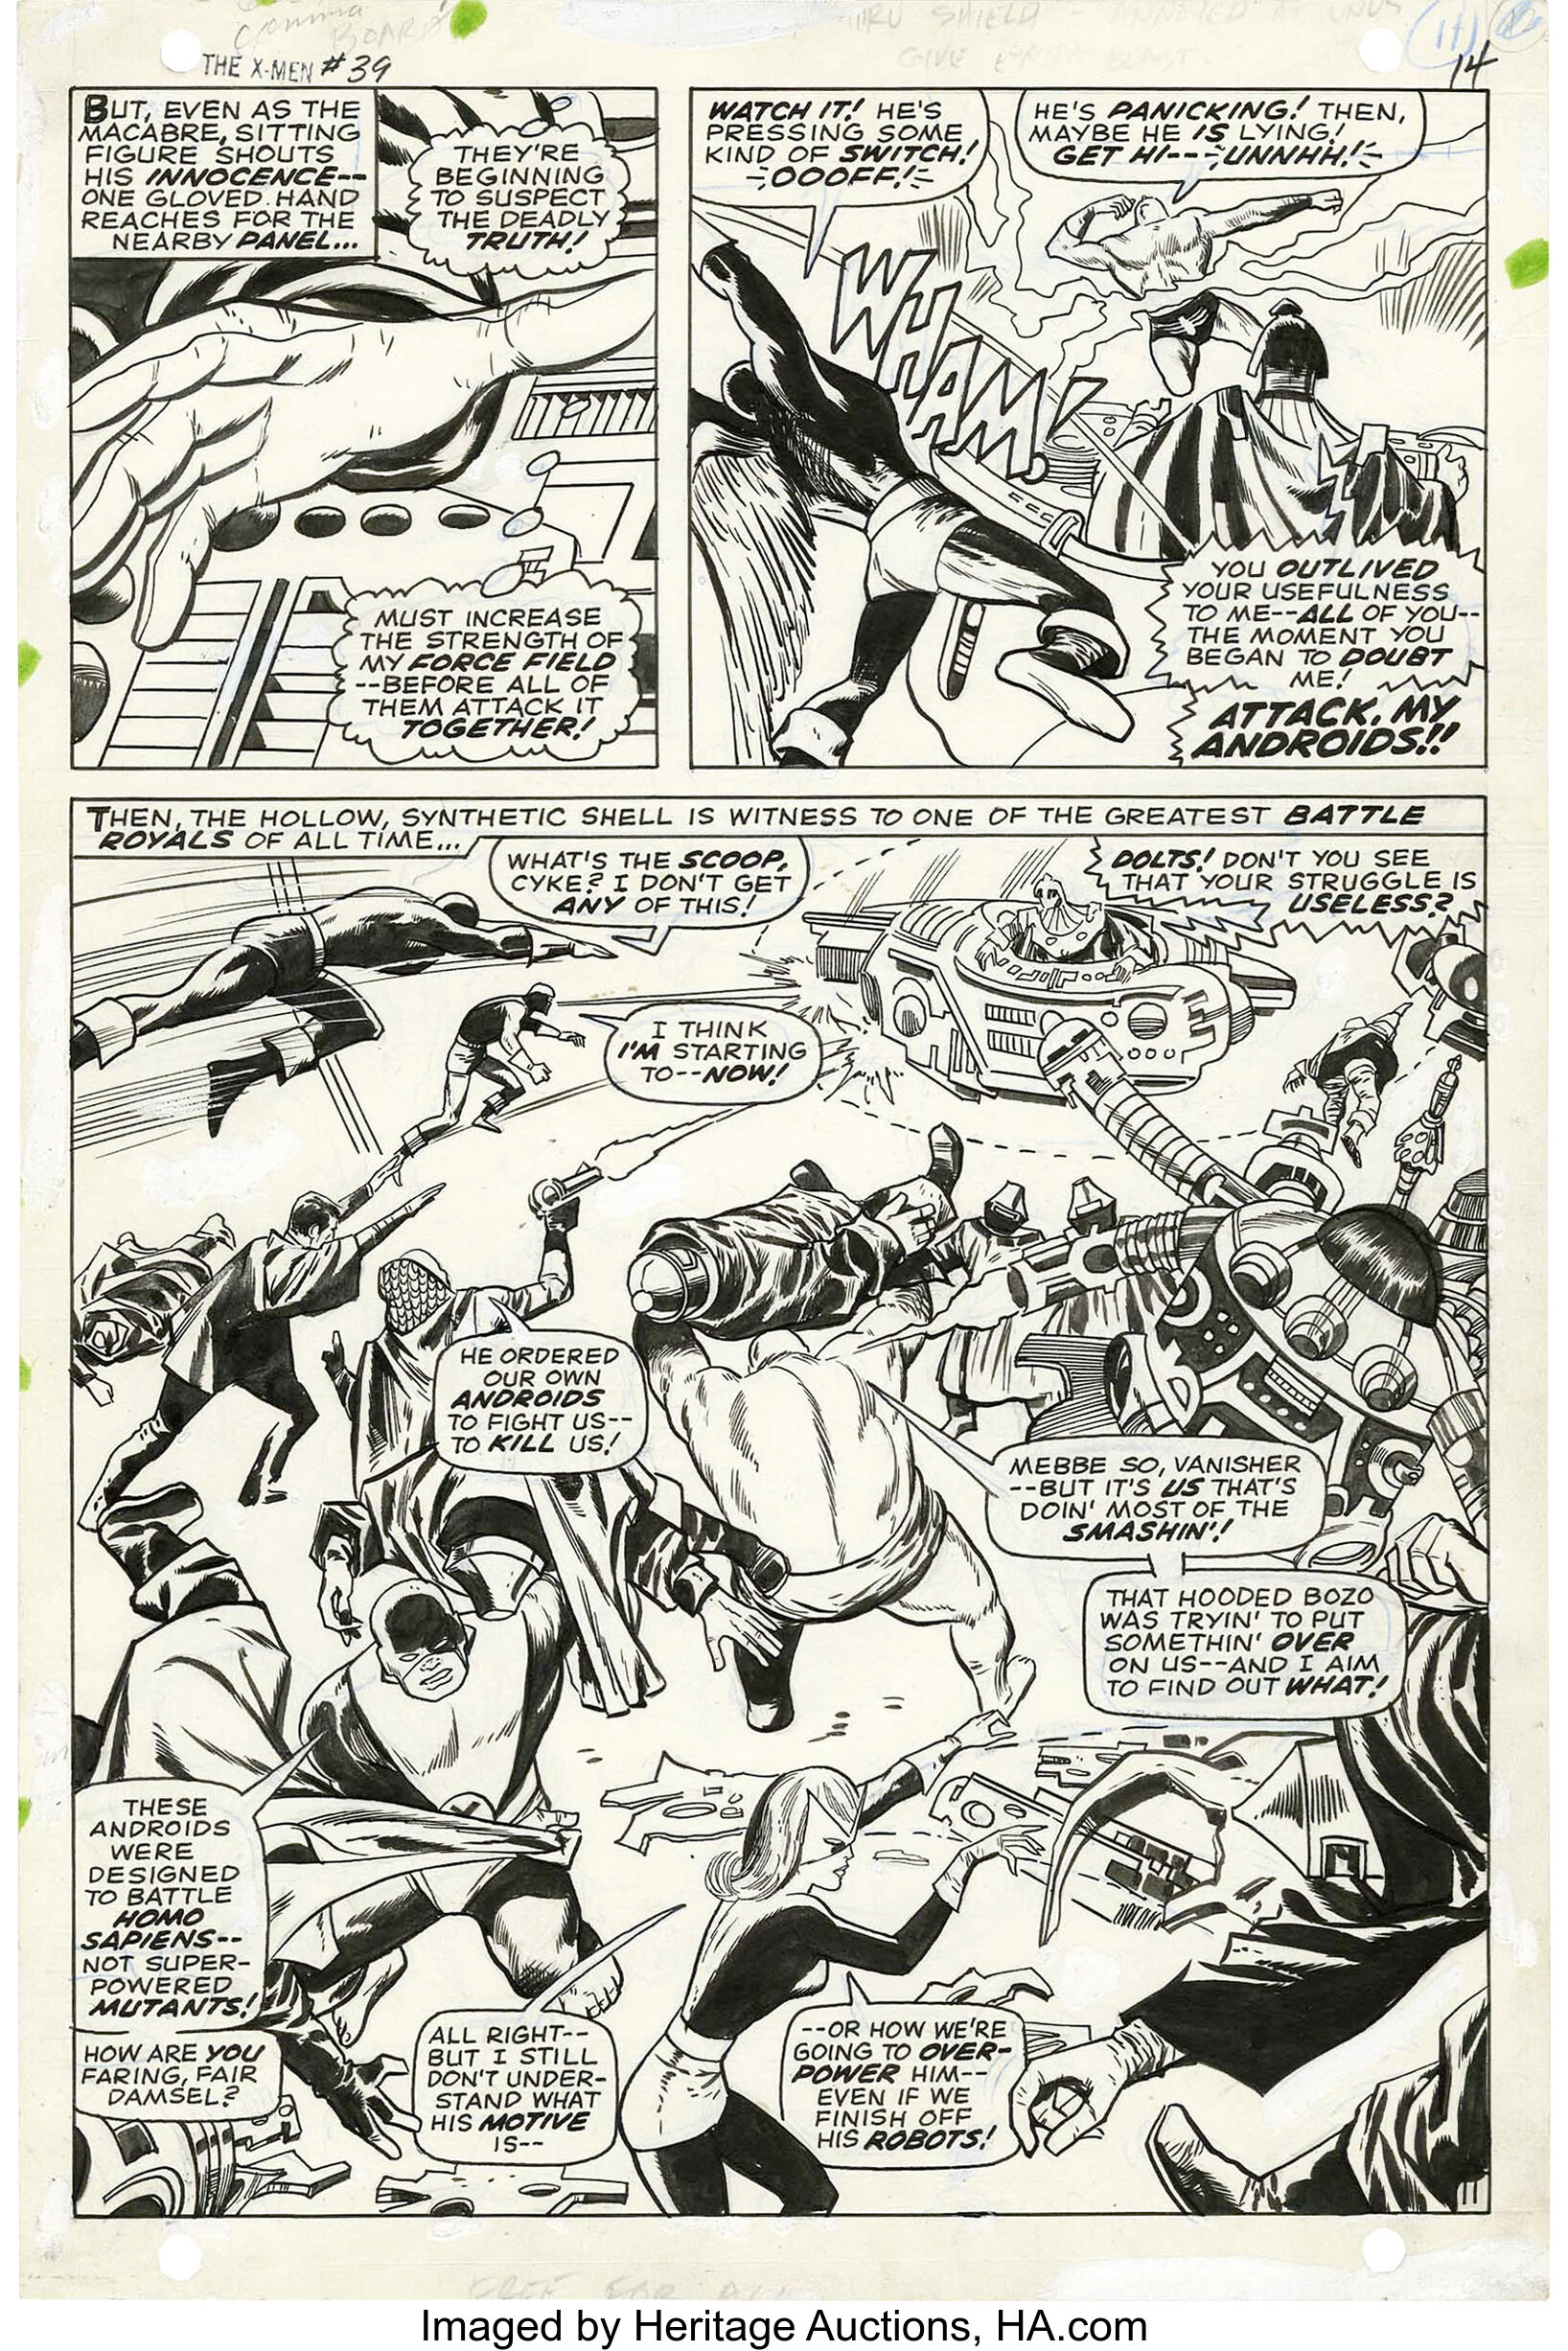 Don Heck And Vince Colletta X Men 39 Page 11 Original Art Marvel Lot 93549 Heritage Auctions